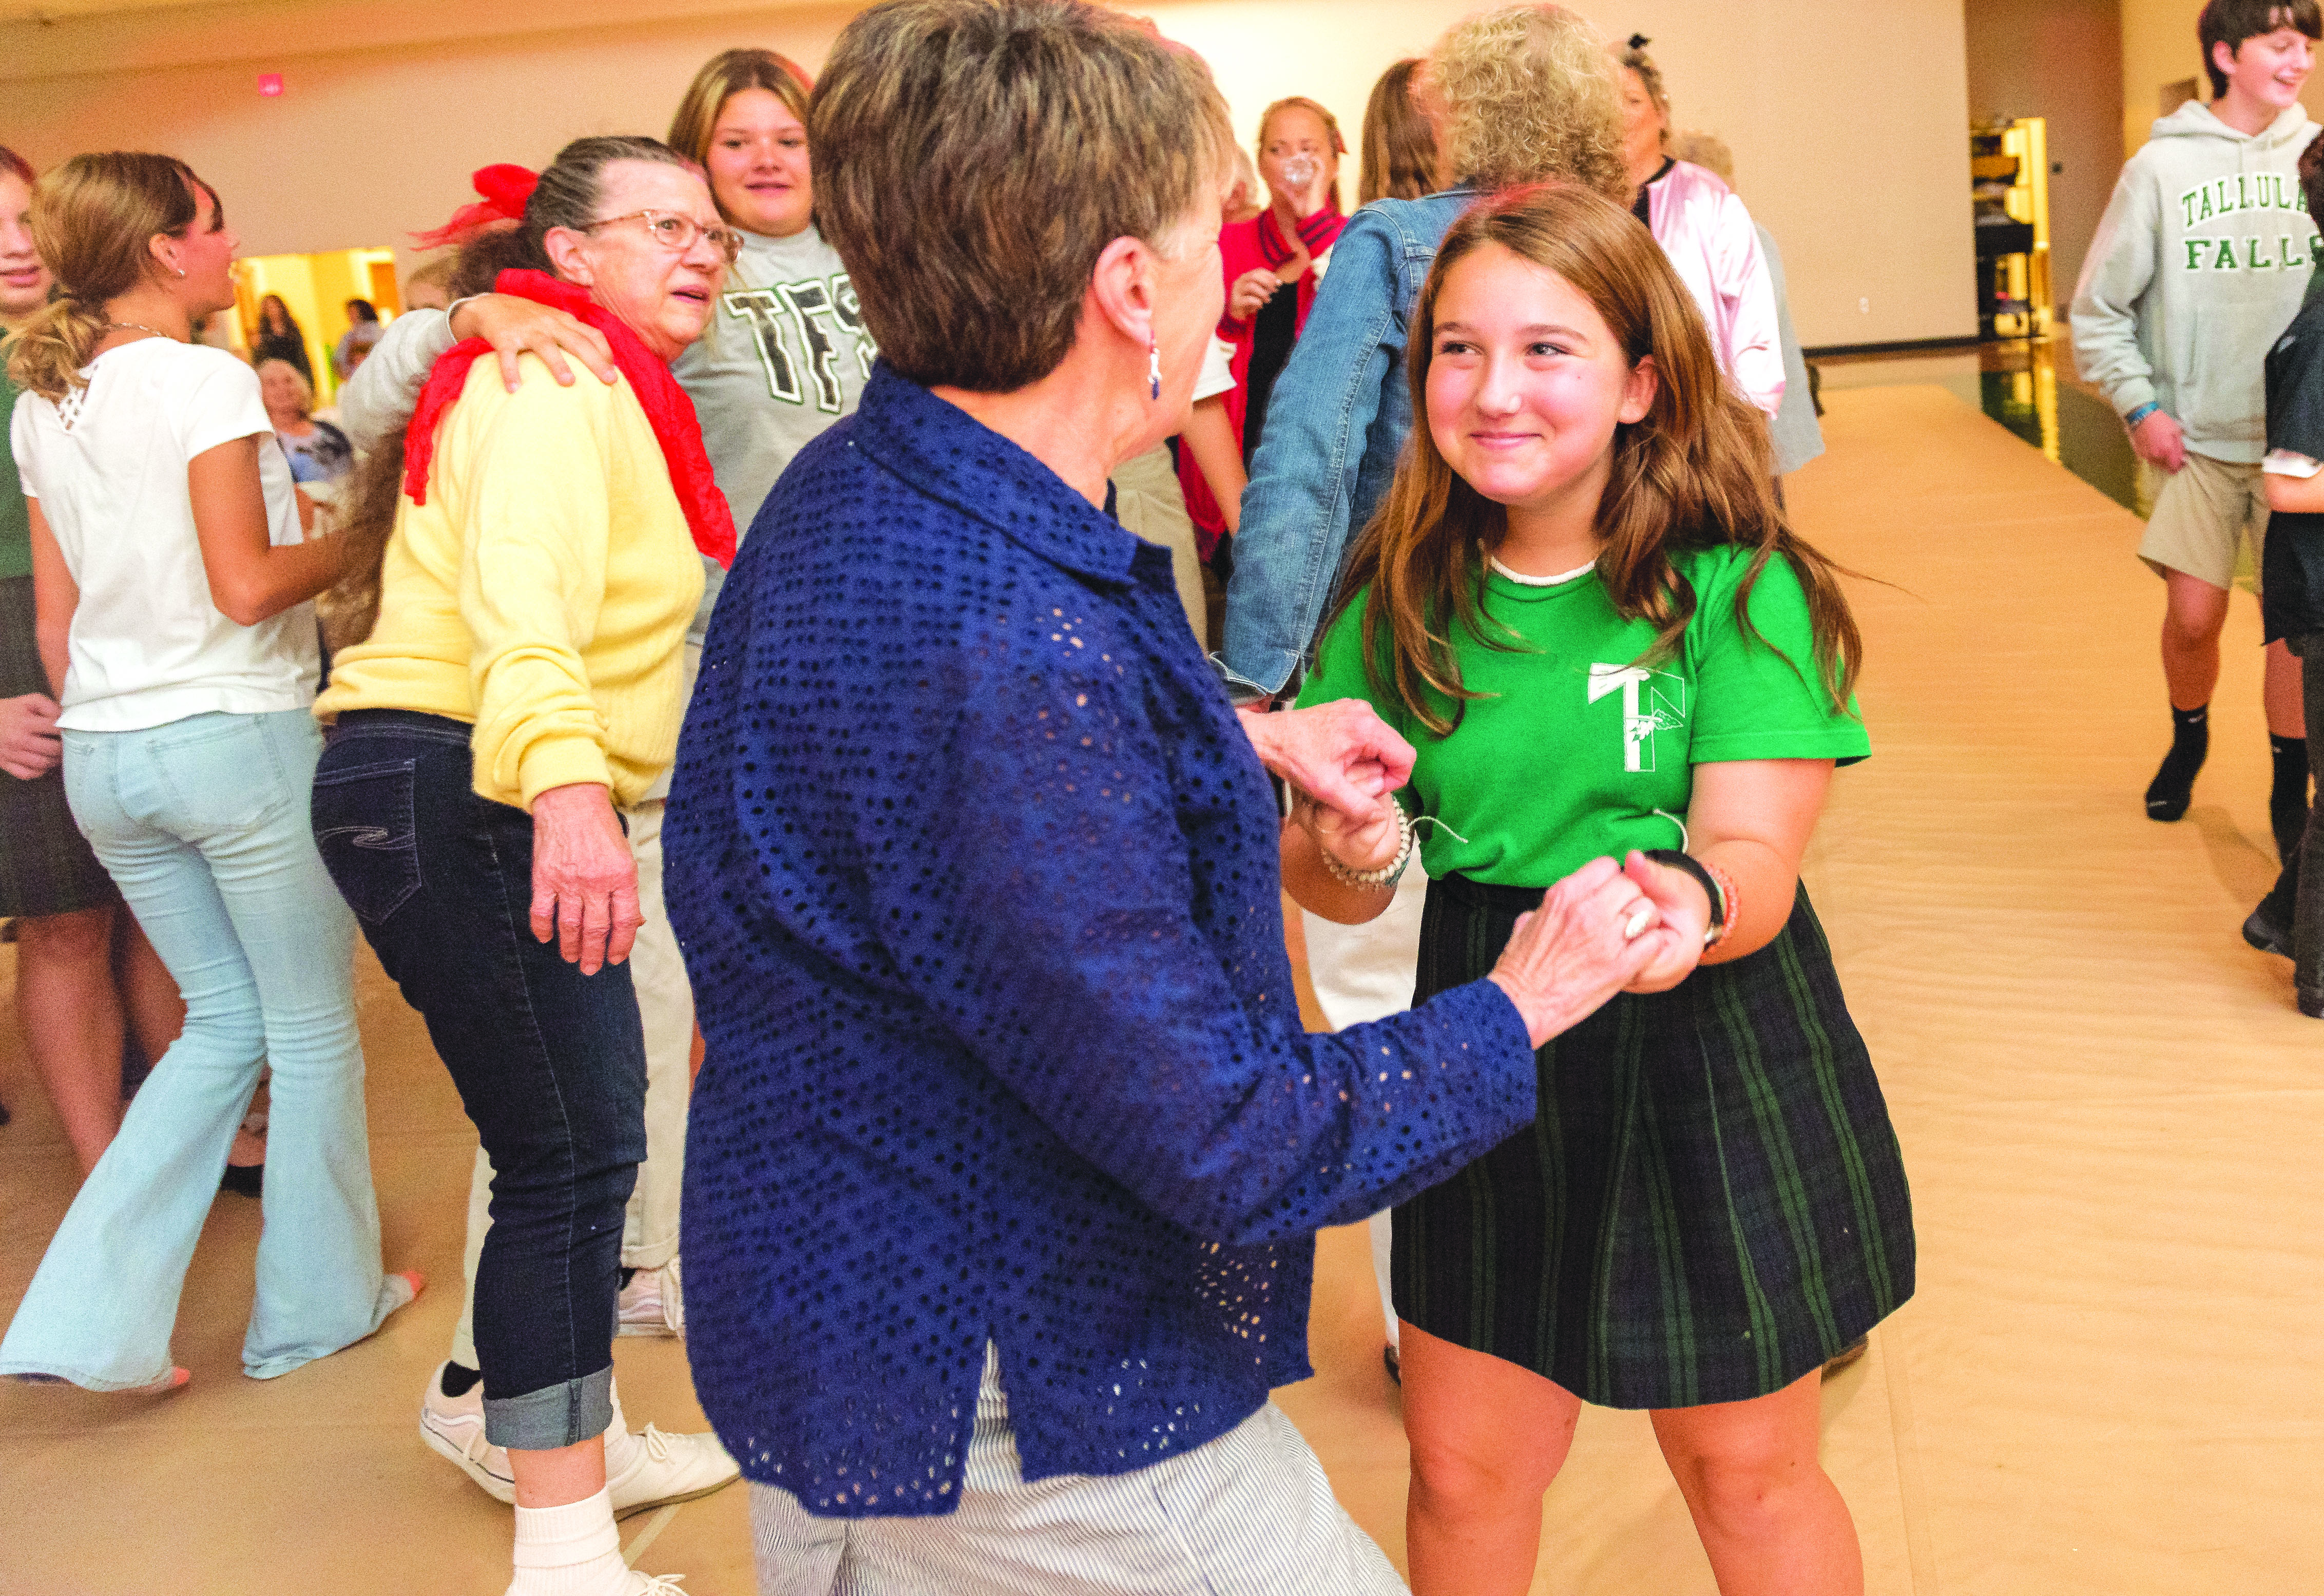 E. Lane Gresham/Tallulah Falls School. Tallulah Falls School recently hosted its Grand Day event at the middle school campus. A Oct. 7 dance featuring the Sock Hops proved popular with students and their guests. Shown (from left) Ginny Allison dances with granddaughter Ellie Shaw, a sixth-grader at Tallulah Falls School.